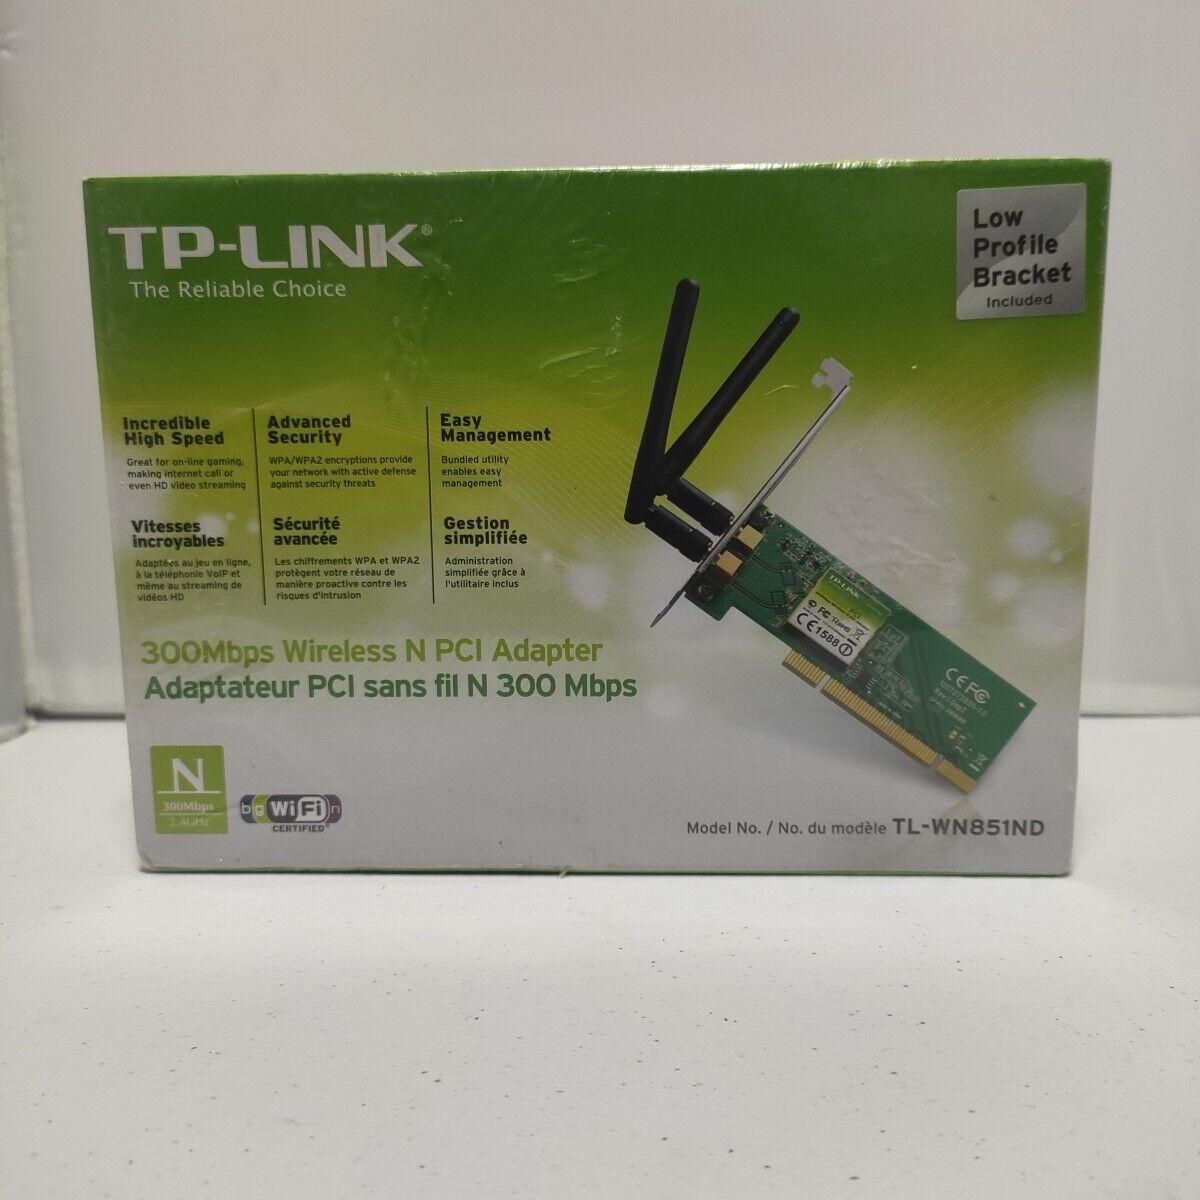 TP-Link Wireless N300 PCI Adapter, 2.4GHz 300Mbps -(TL-WN851ND)